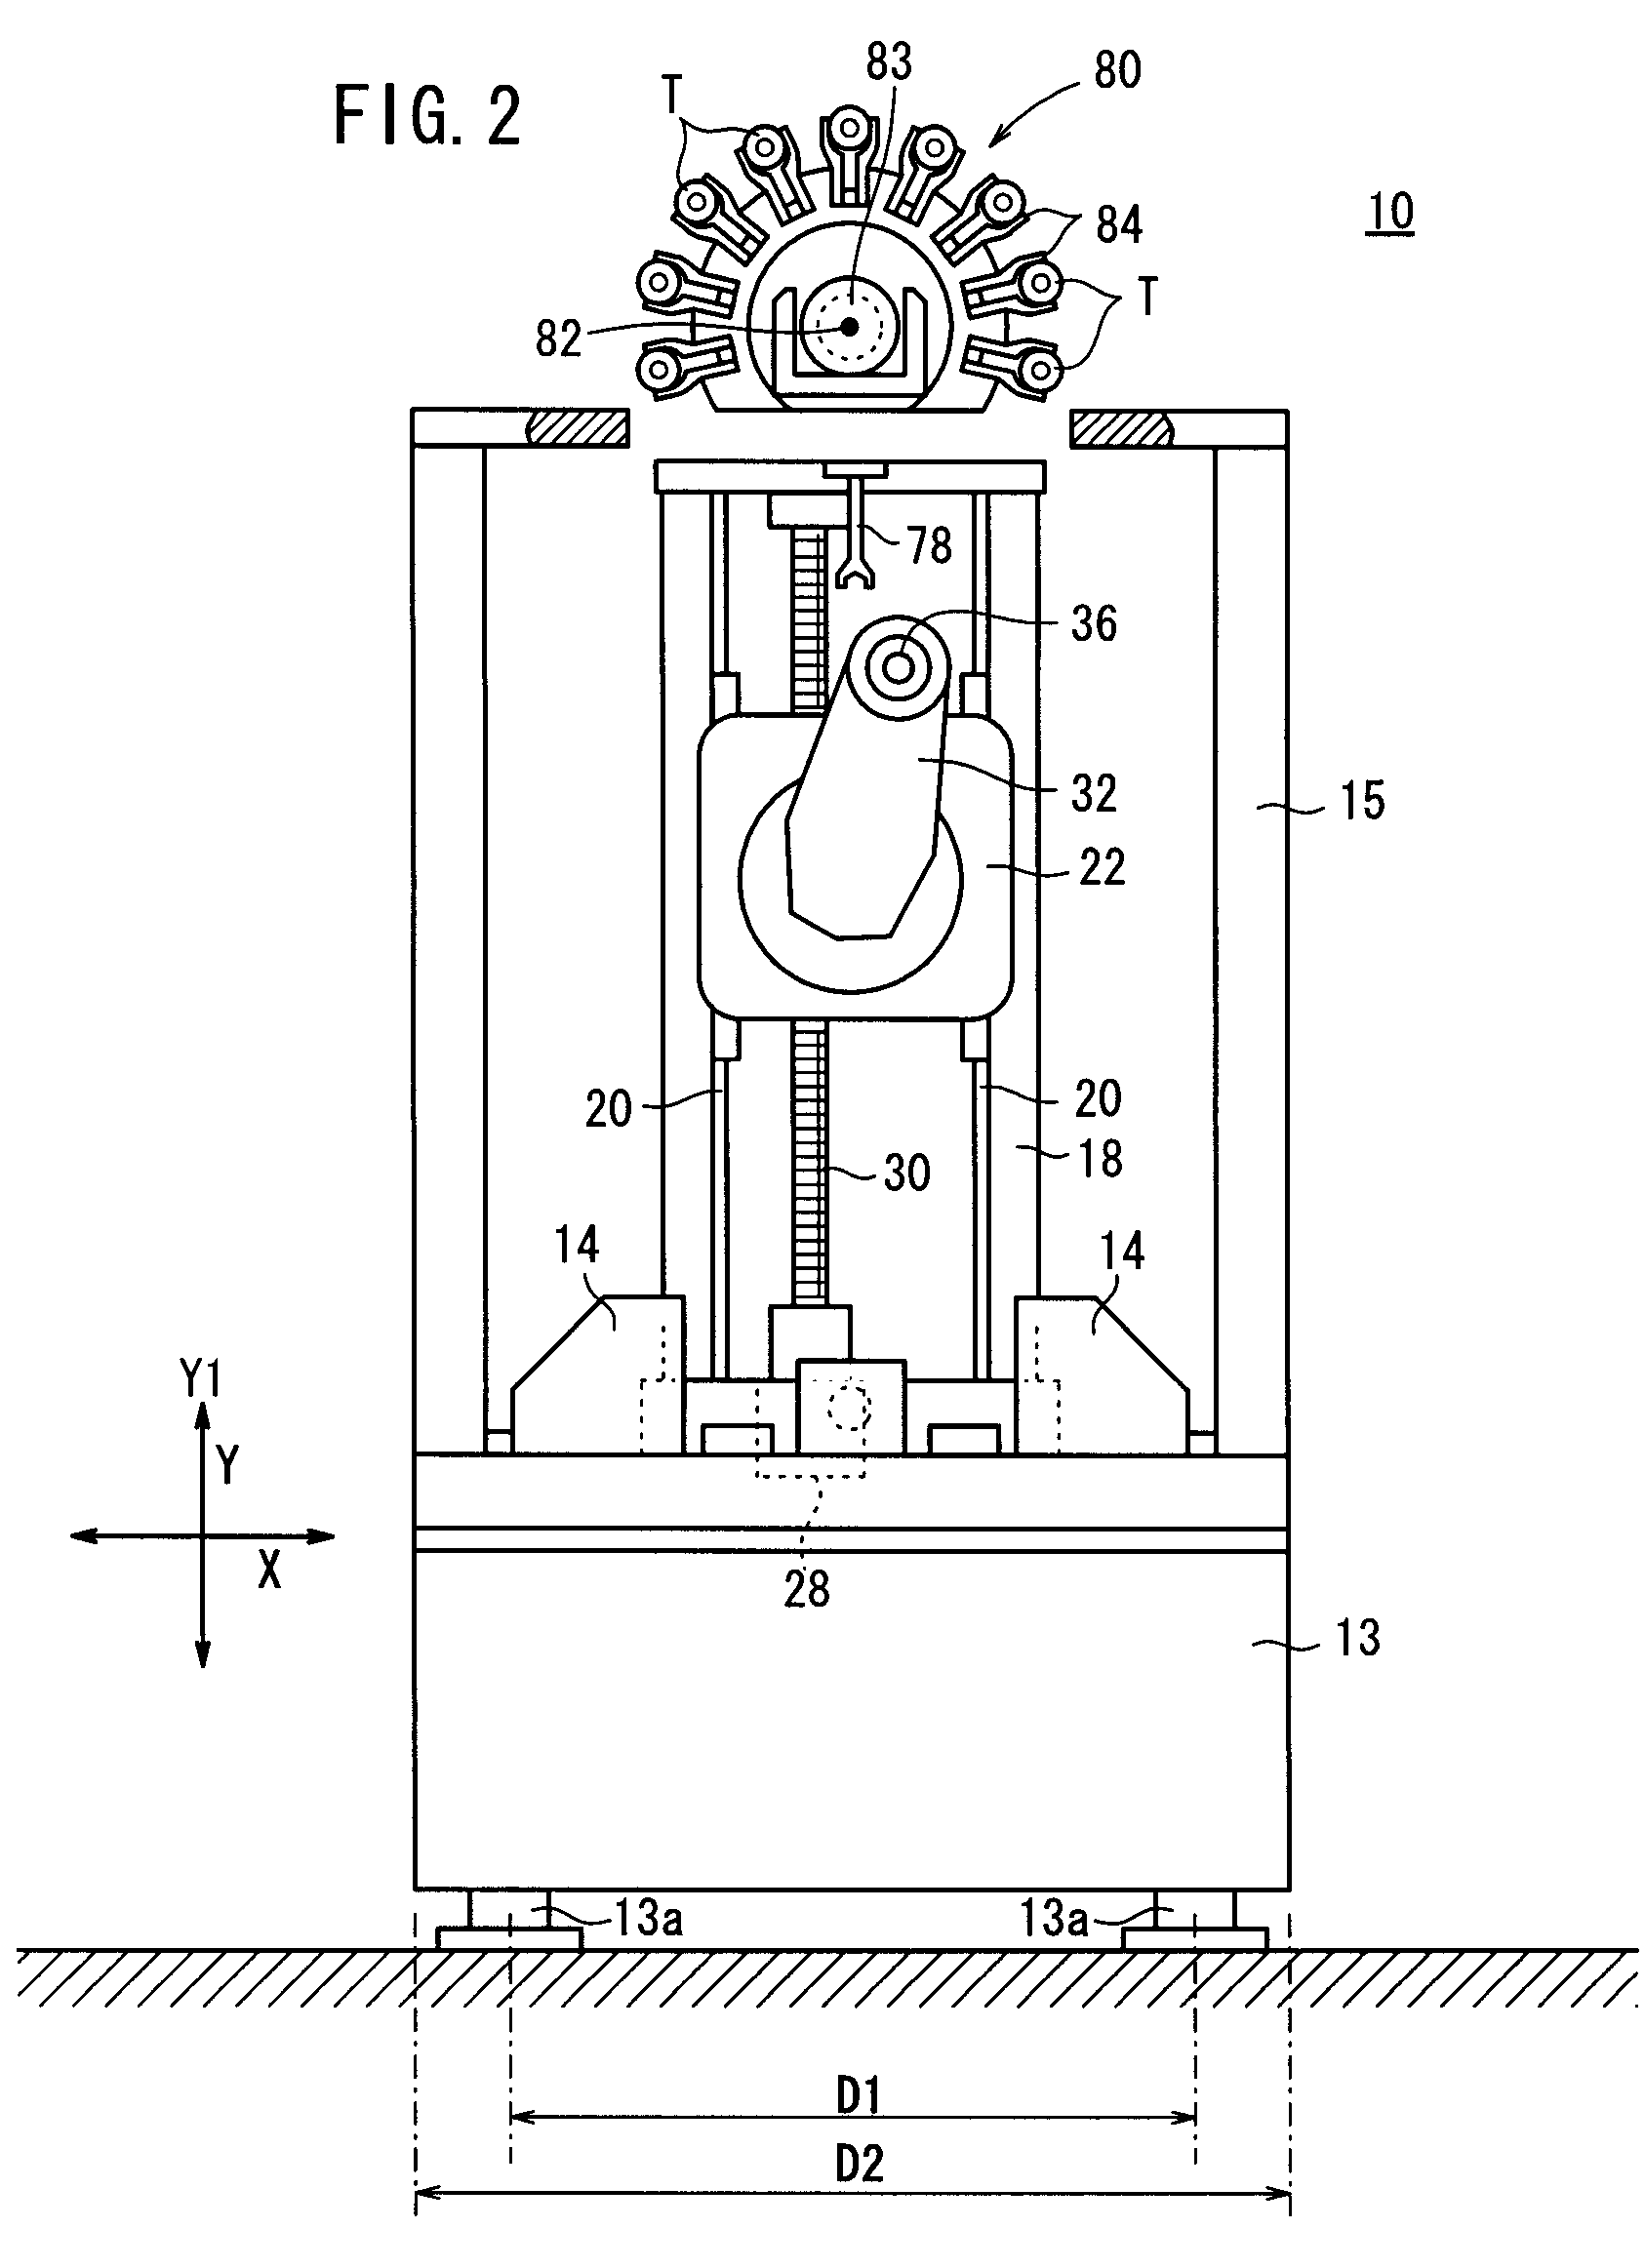 Machine tool including a Z-table and processing spindle rotatably supported on a rotation arm